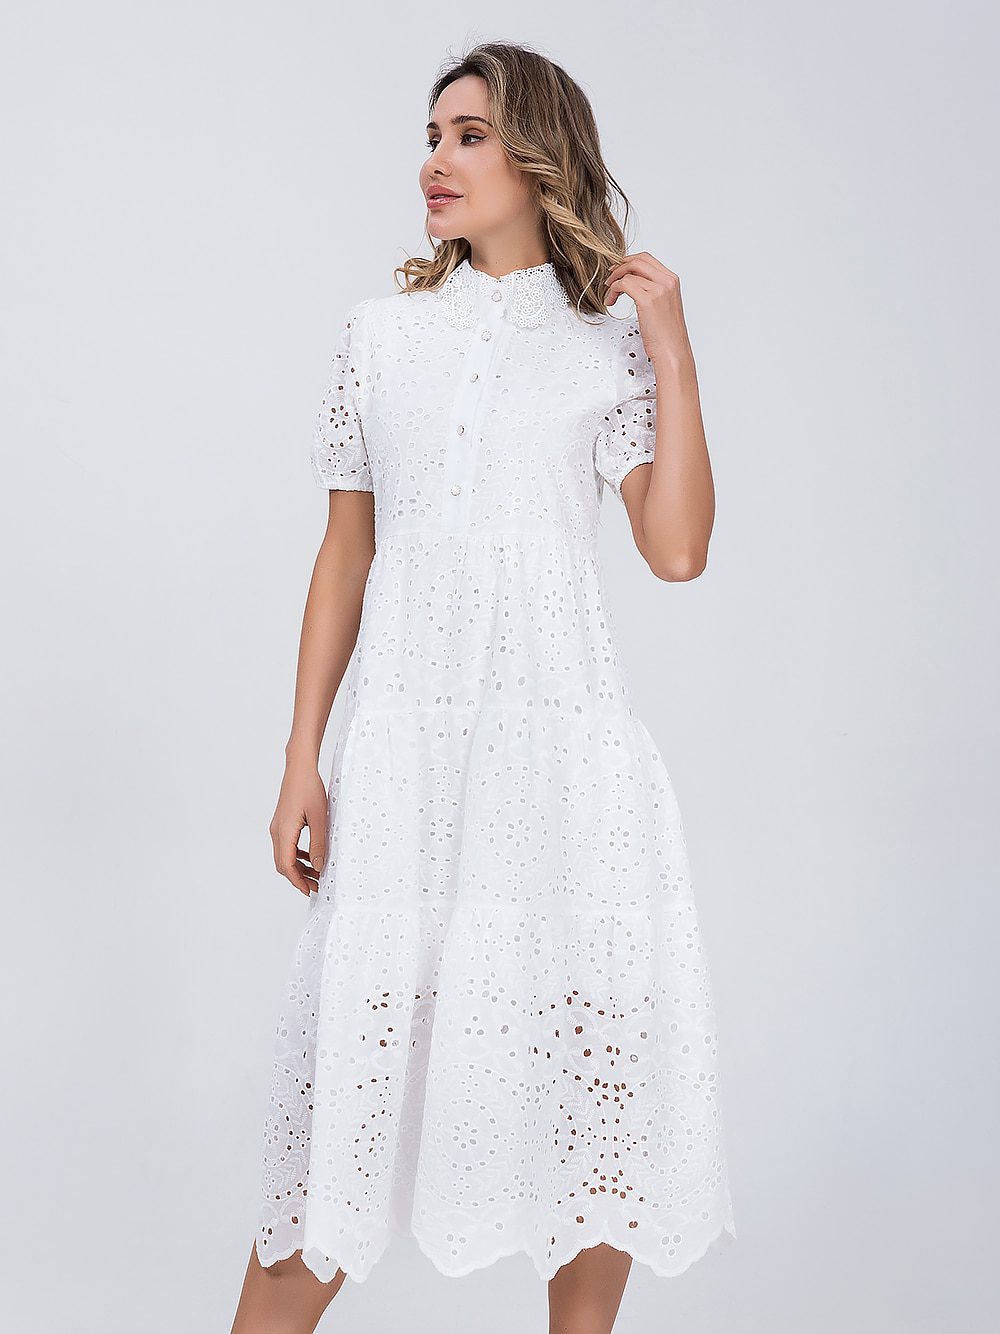 Cotton Hollow Out High Waist Ruffled A-Line White Dress in Dresses